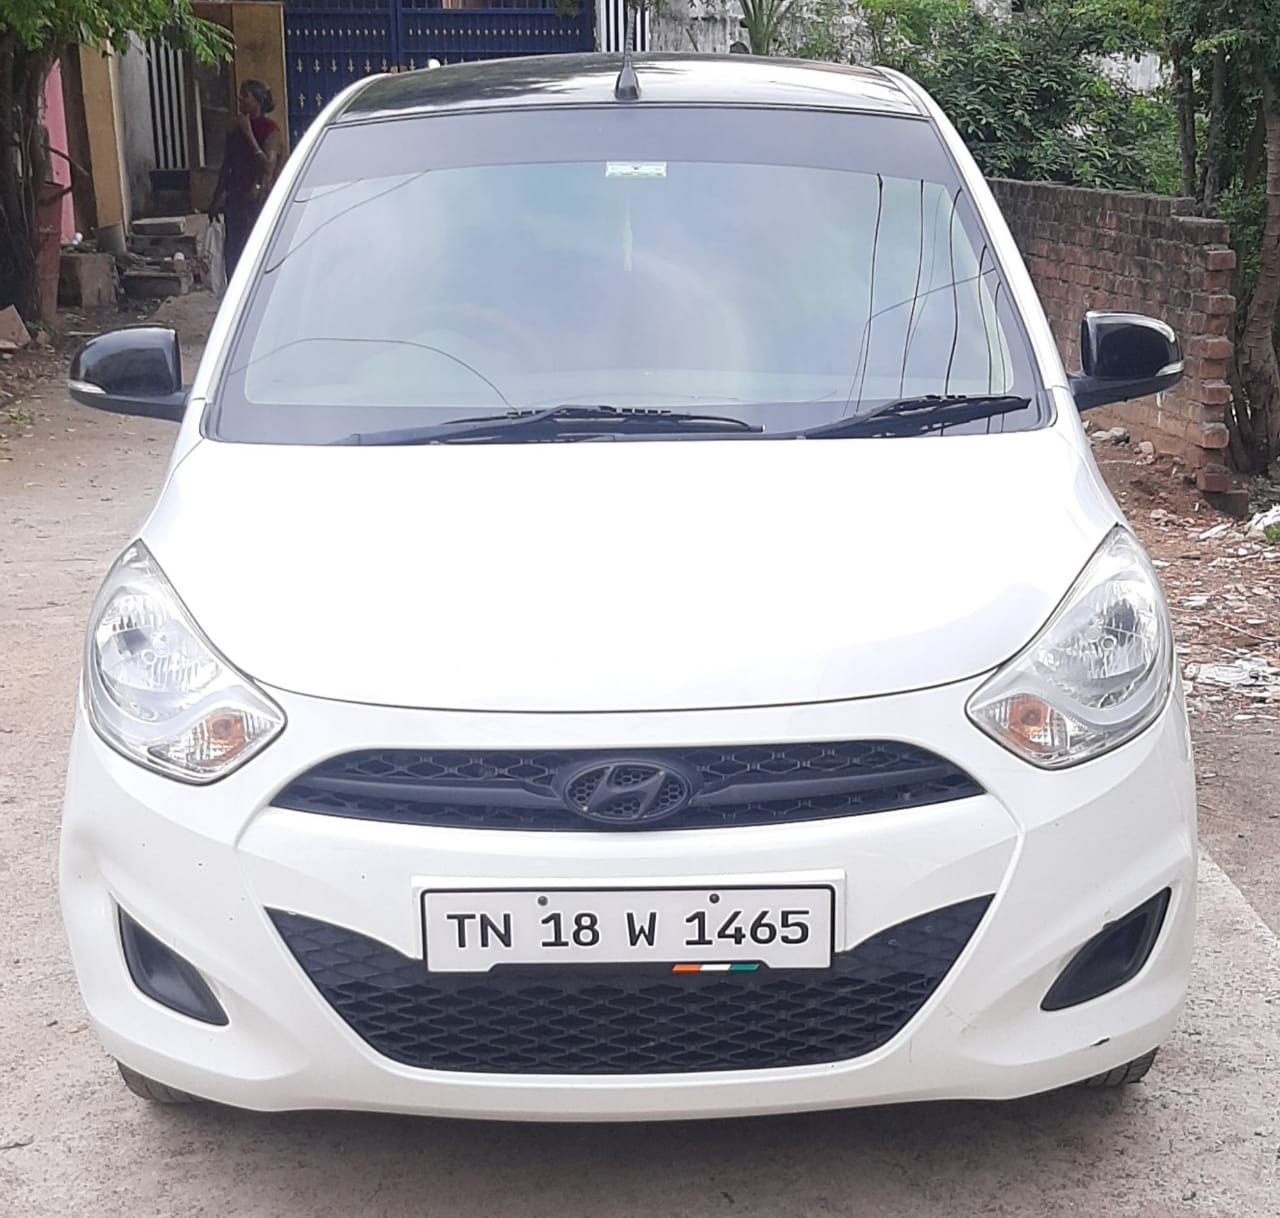 4558-for-sale-Hyundai-i10-Petrol-Third-Owner-2012-TN-registered-rs-265000